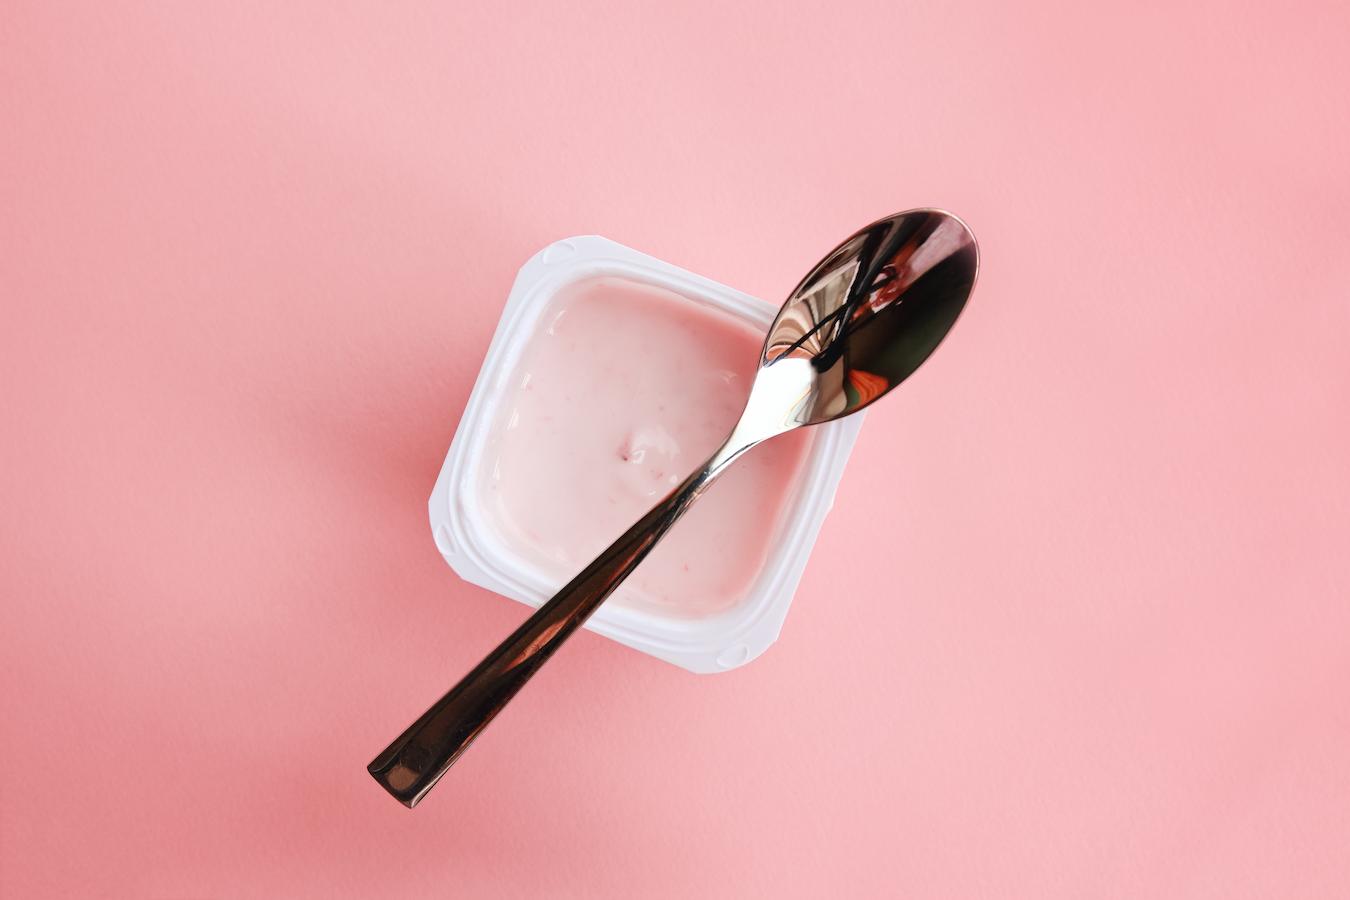 pink yogurt cup with a spoon artificial sweeteners probiotic supplements health benefits whole grains bowel movements processed foods